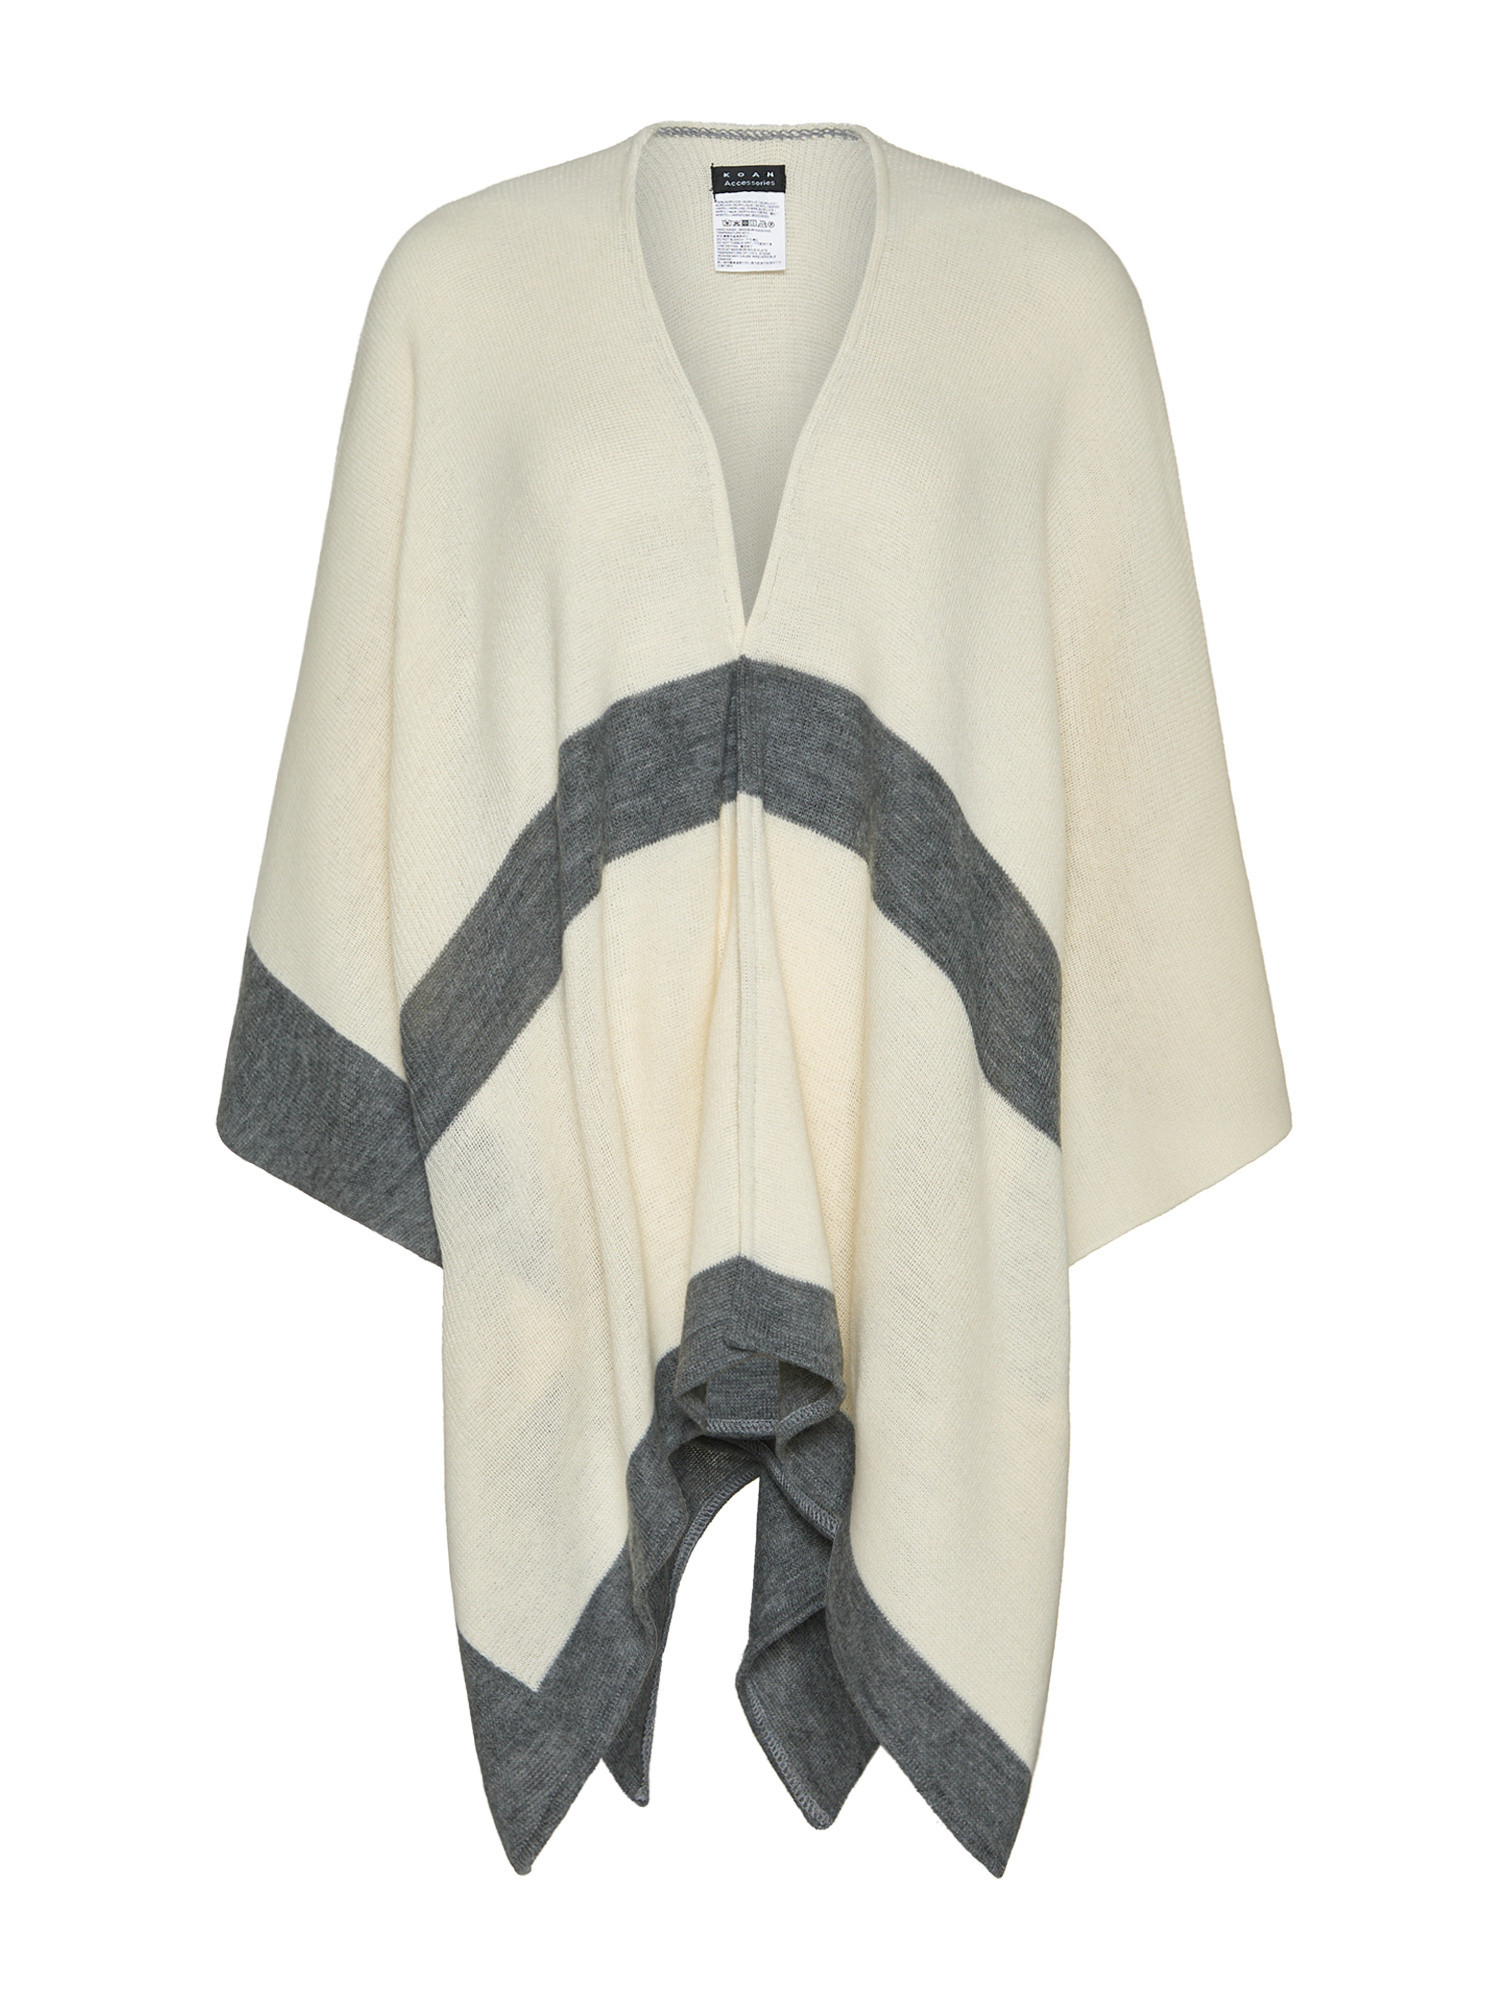 Koan - Two-tone knitted poncho, Grey, large image number 0